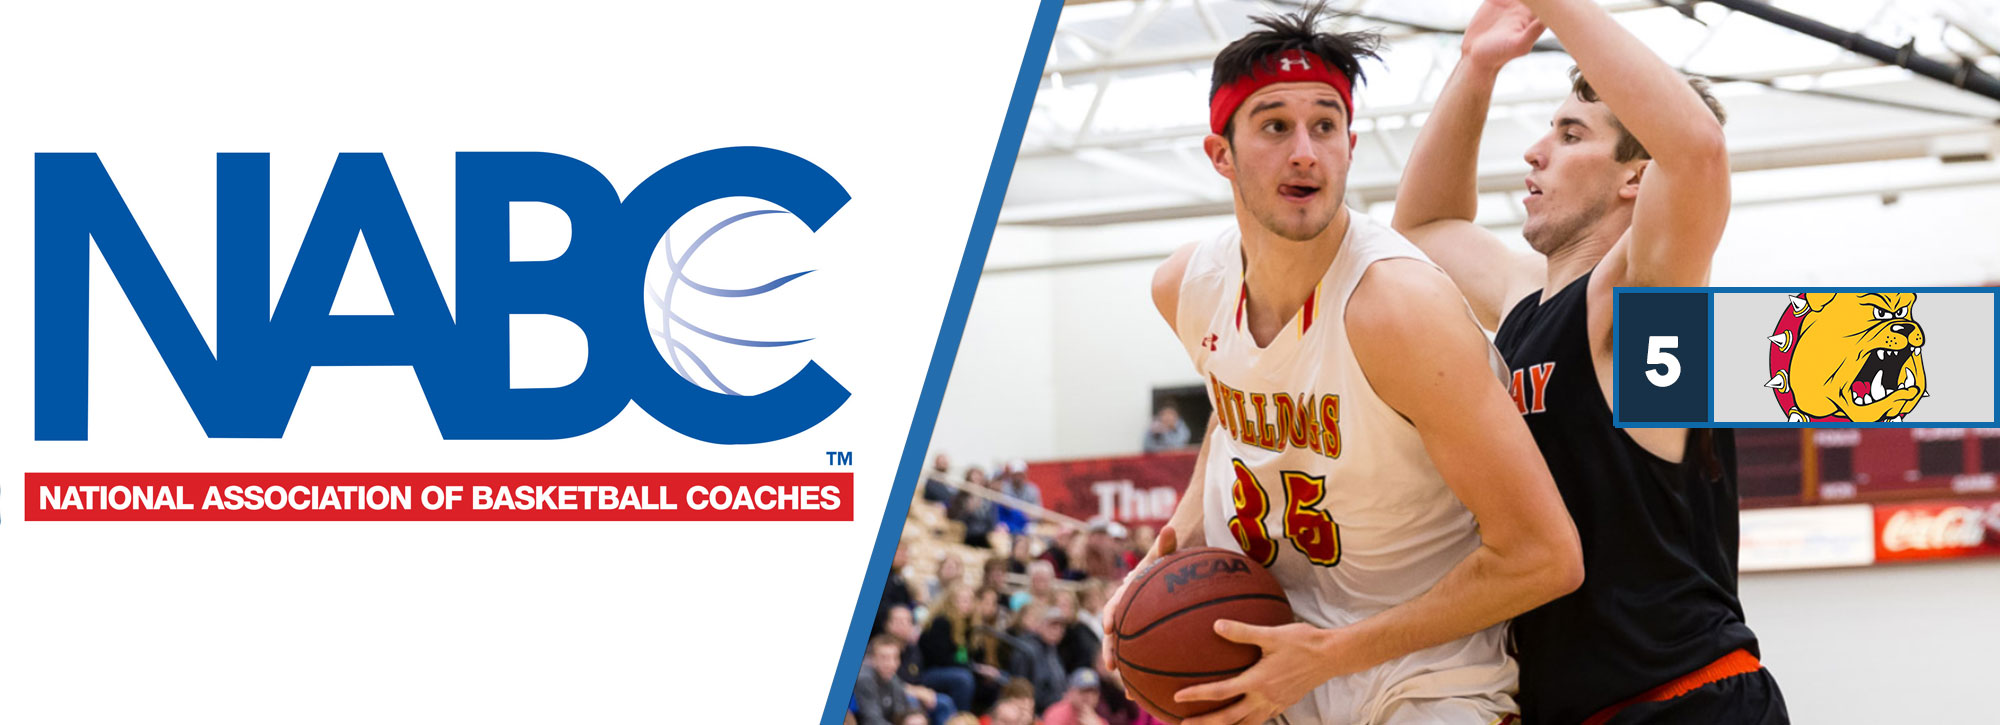 Ferris State No. 5 in Latest NABC Men's Basketball Rankings